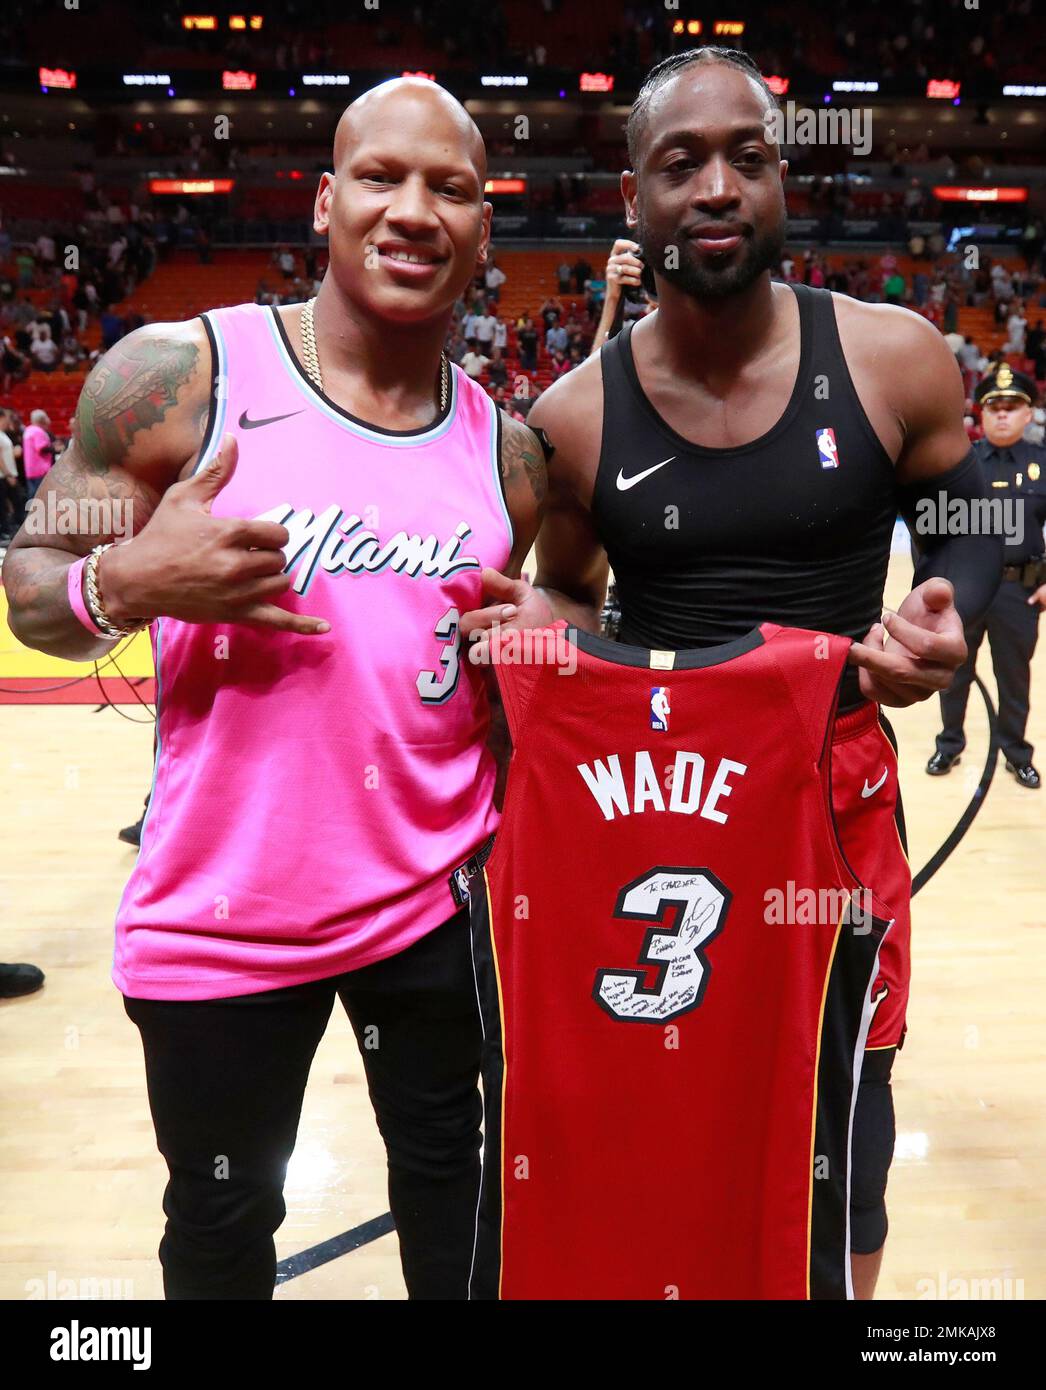 Miami Heat guard Dwyane Wade, right, poses with Pittsburgh Steelers  linebacker Ryan Shazier after an NBA basketball game Friday, March 15,  2019, in Miami. Wade gave his game jersey to Shazier. The